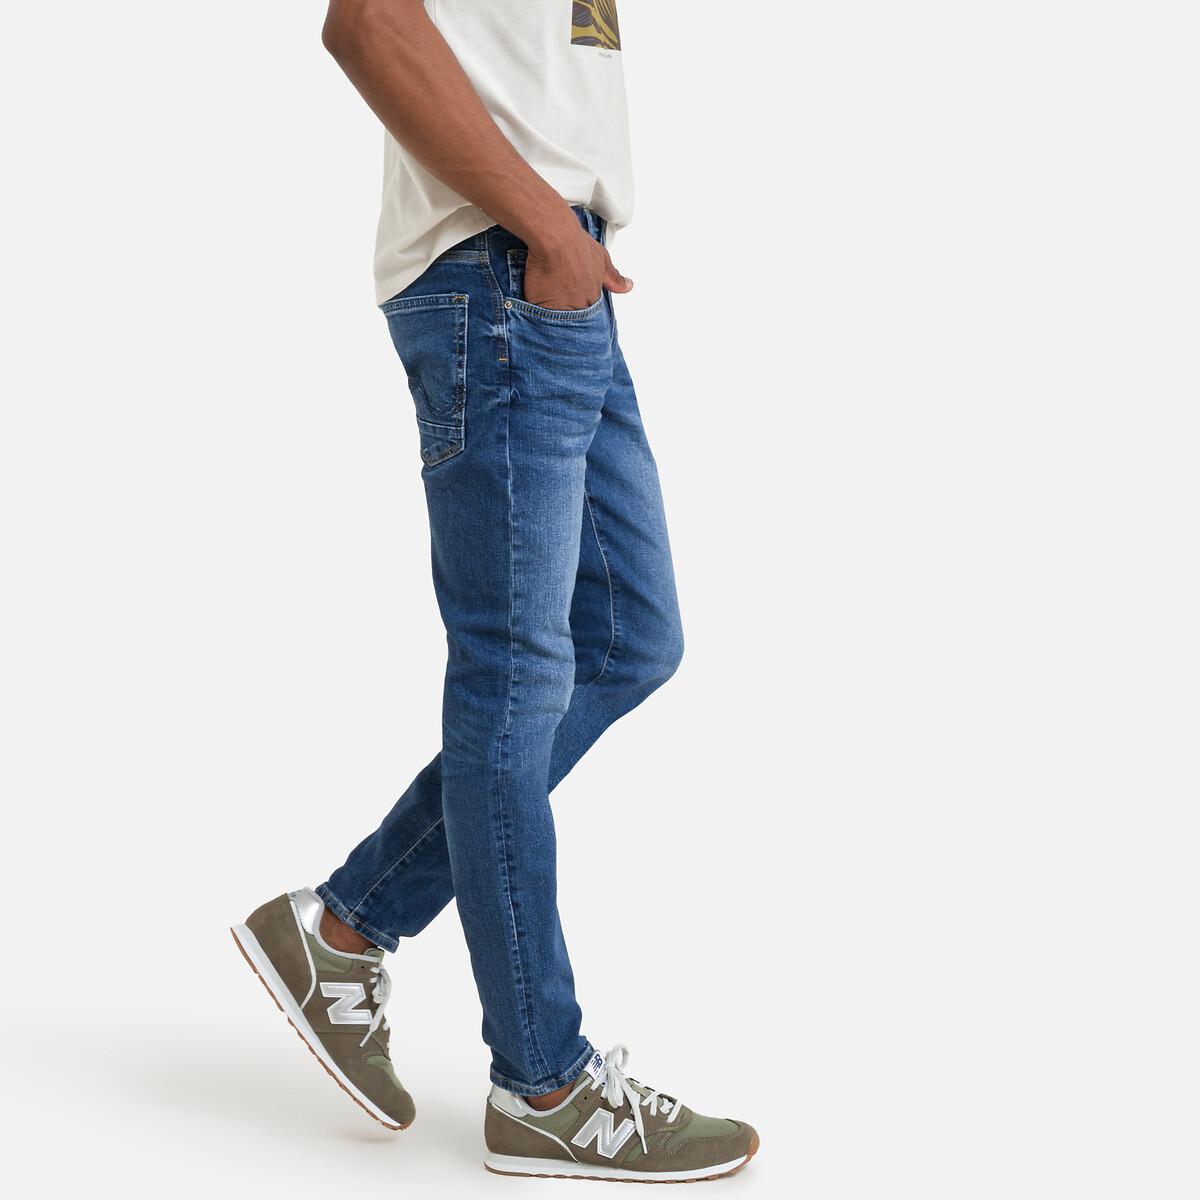 jeans in slim mid fit Supreme Industries stretch seaham Redoute | La Petrol and rise